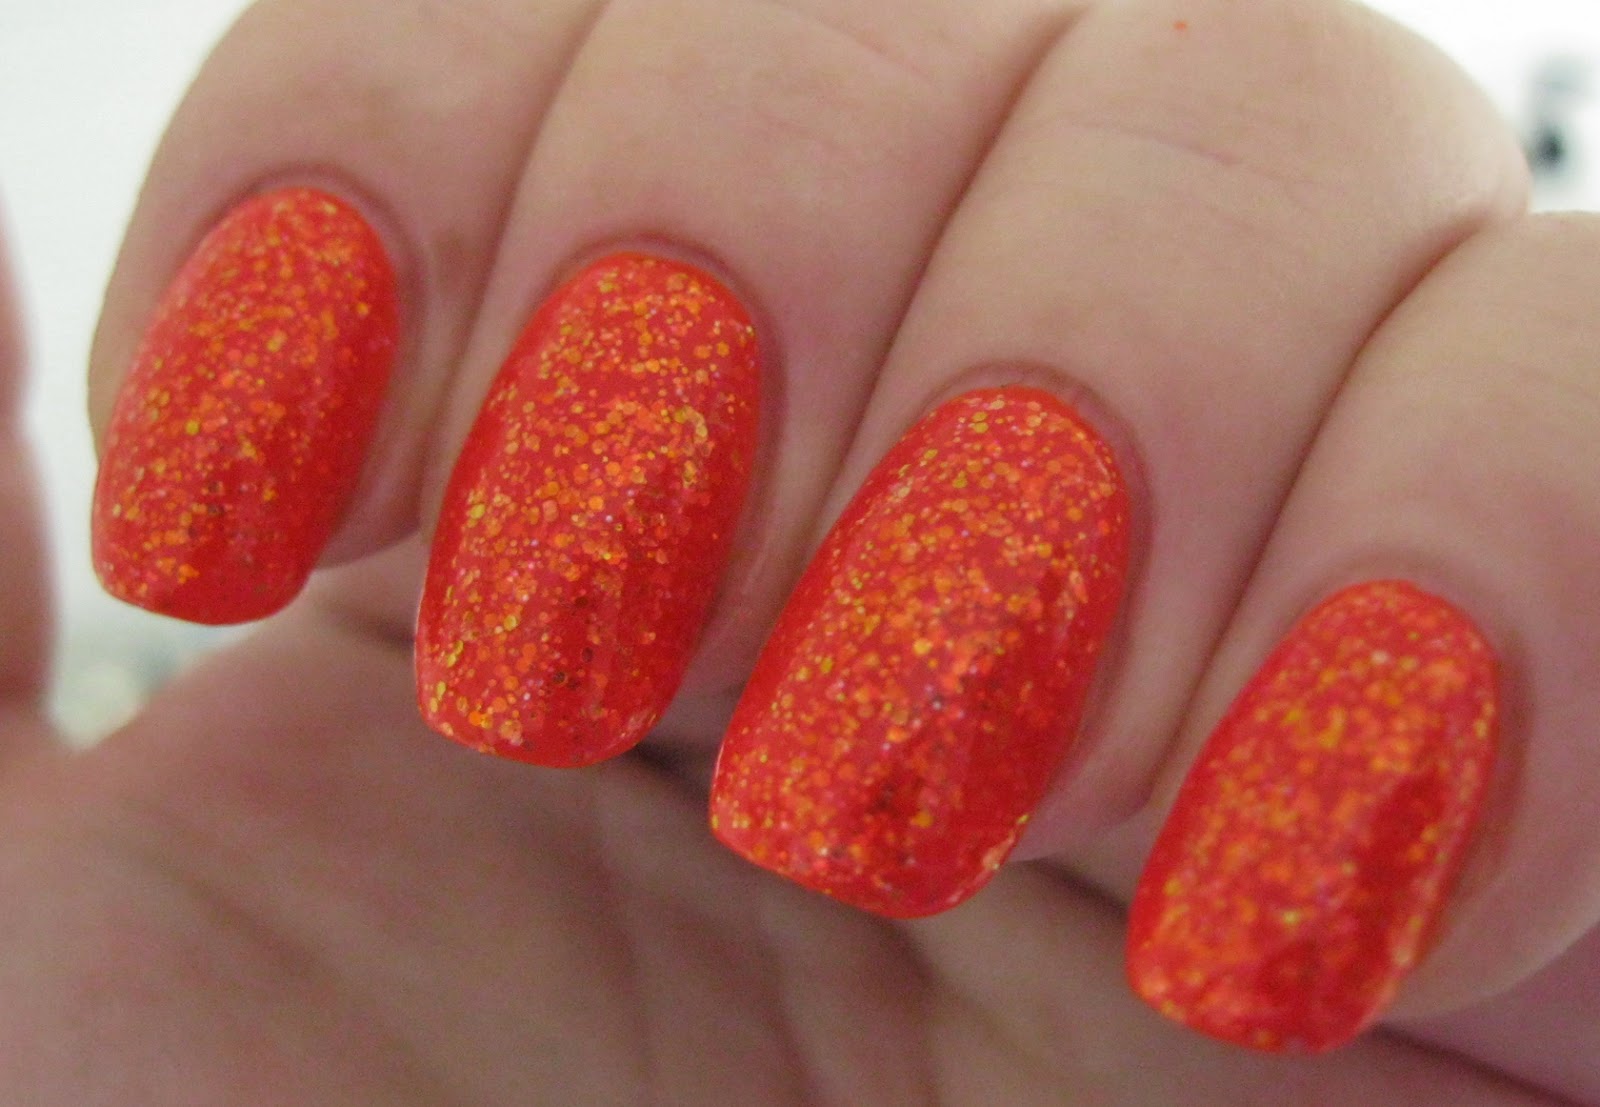 10. Orly Nail Lacquer in "Orange Punch" - wide 4